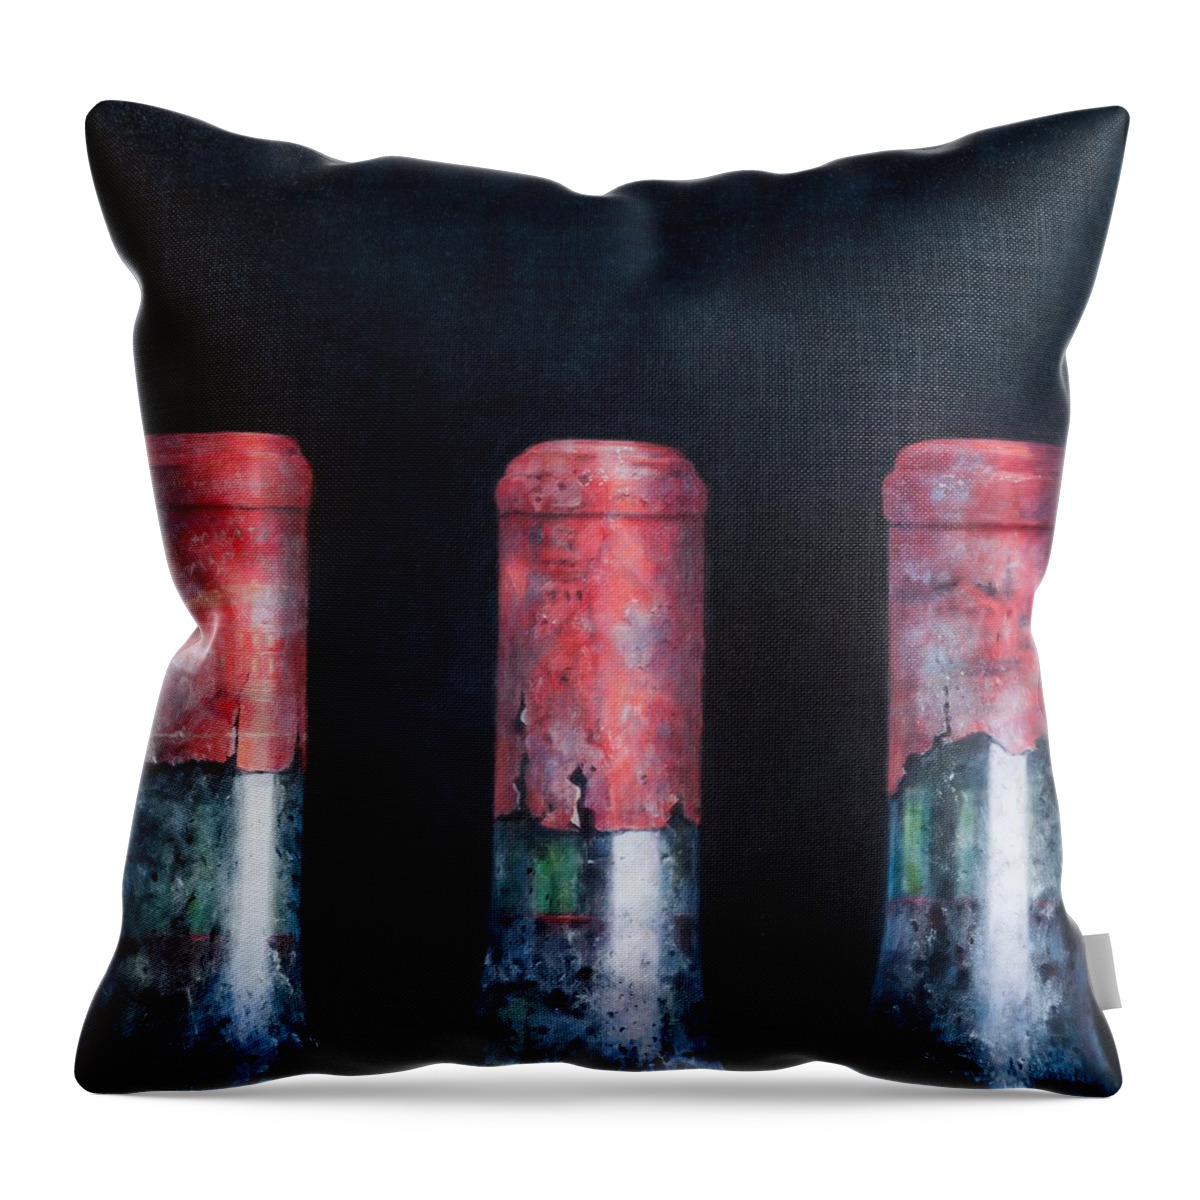 Dust; Dusty; Claret; Clarets; Red Wine; Wine; Wine Bottle; Bottle; Bottles; Wine Throw Pillow featuring the painting Three dusty clarets by Lincoln Seligman